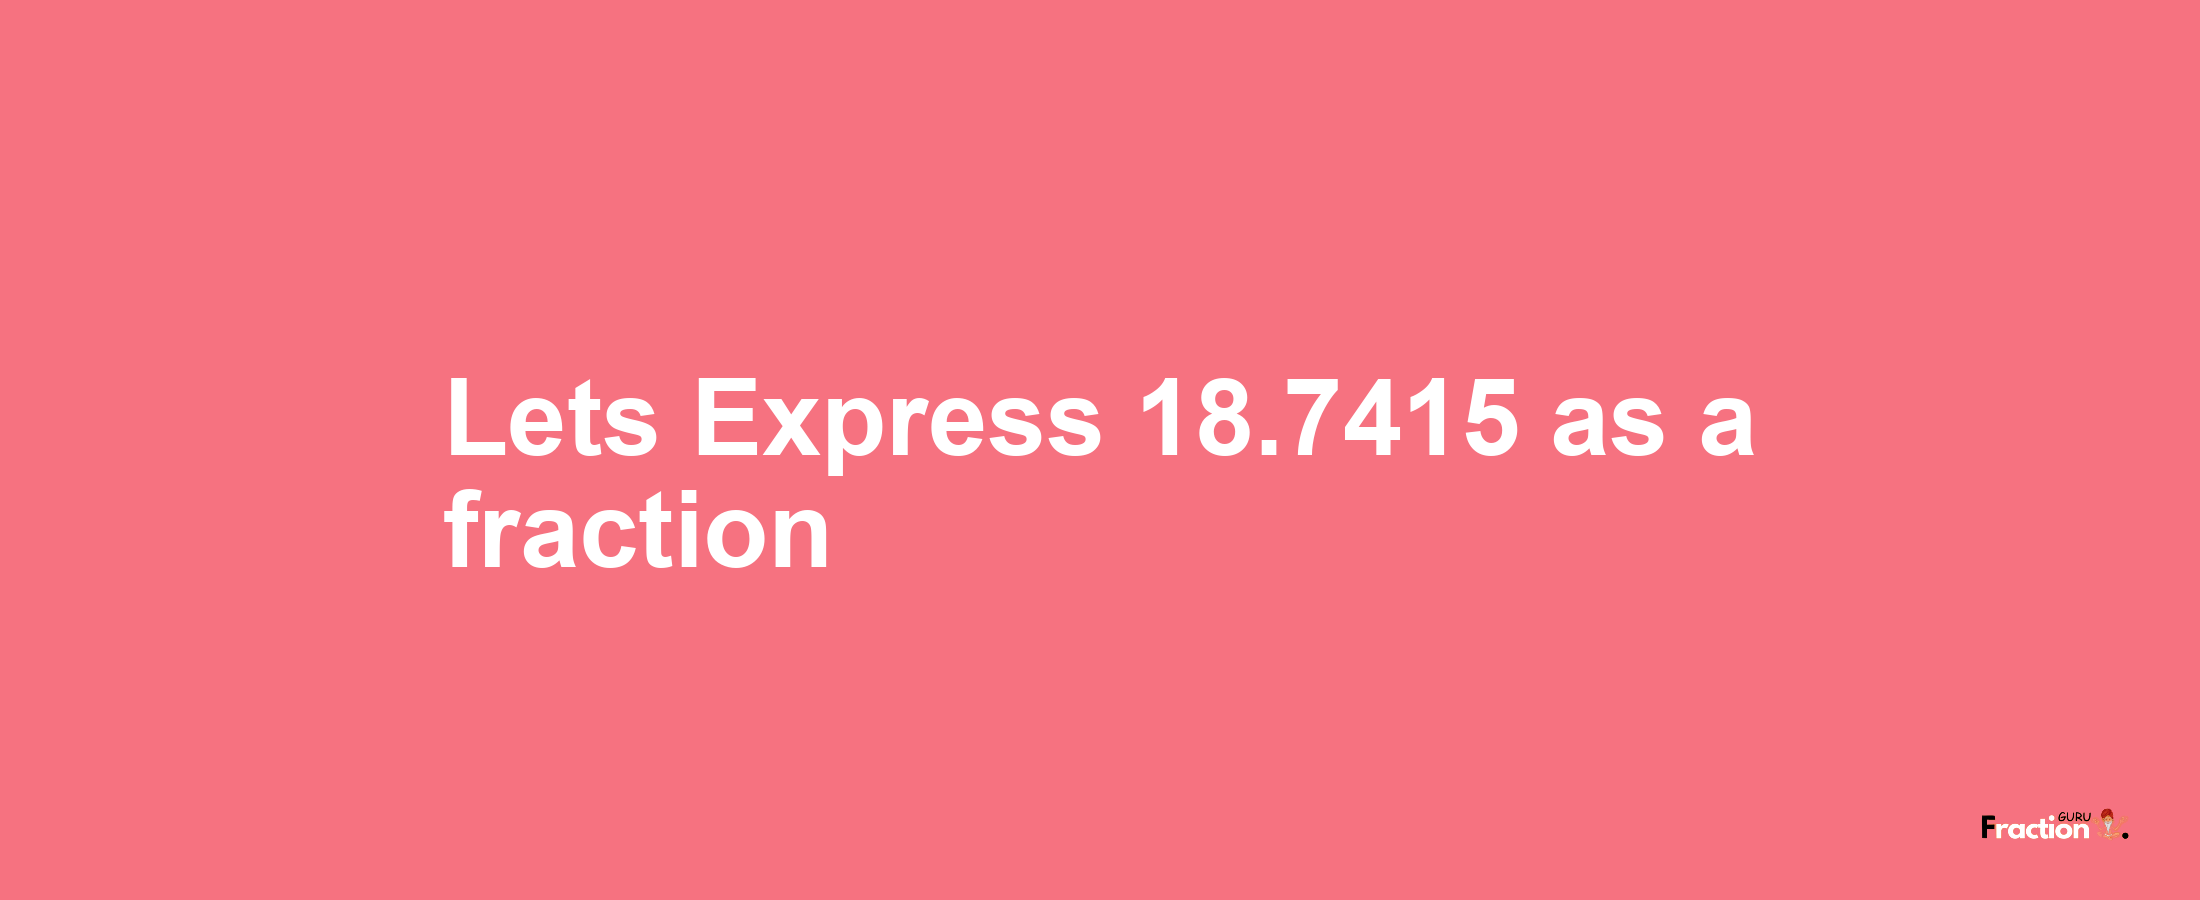 Lets Express 18.7415 as afraction